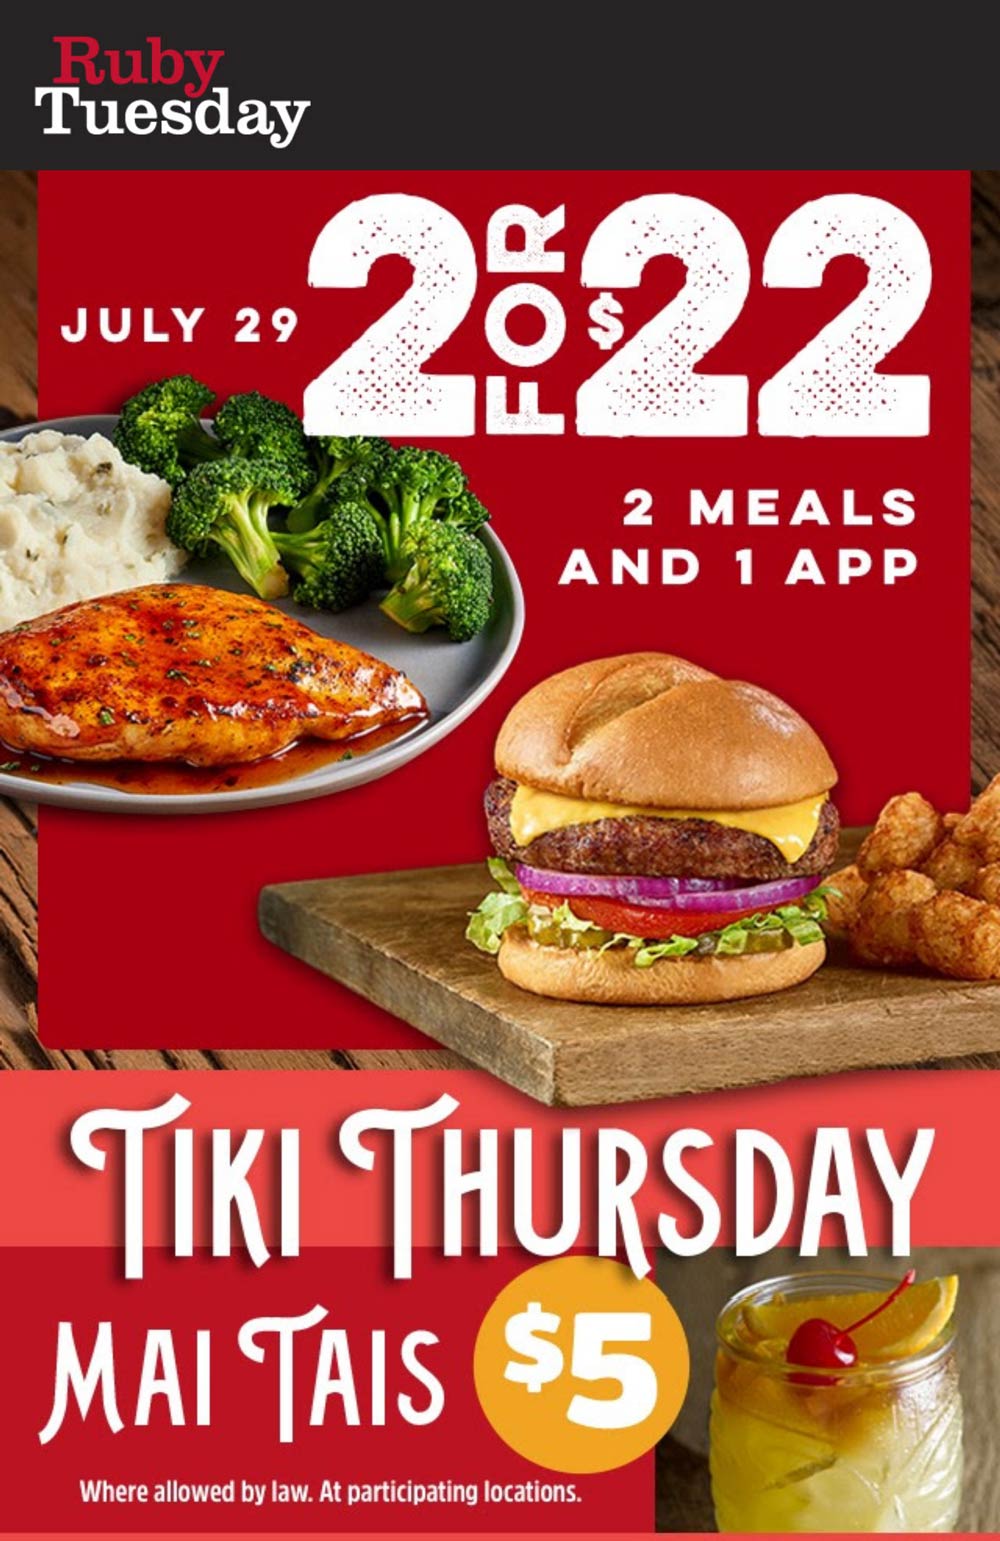 Ruby Tuesday coupons & promo code for [December 2022]